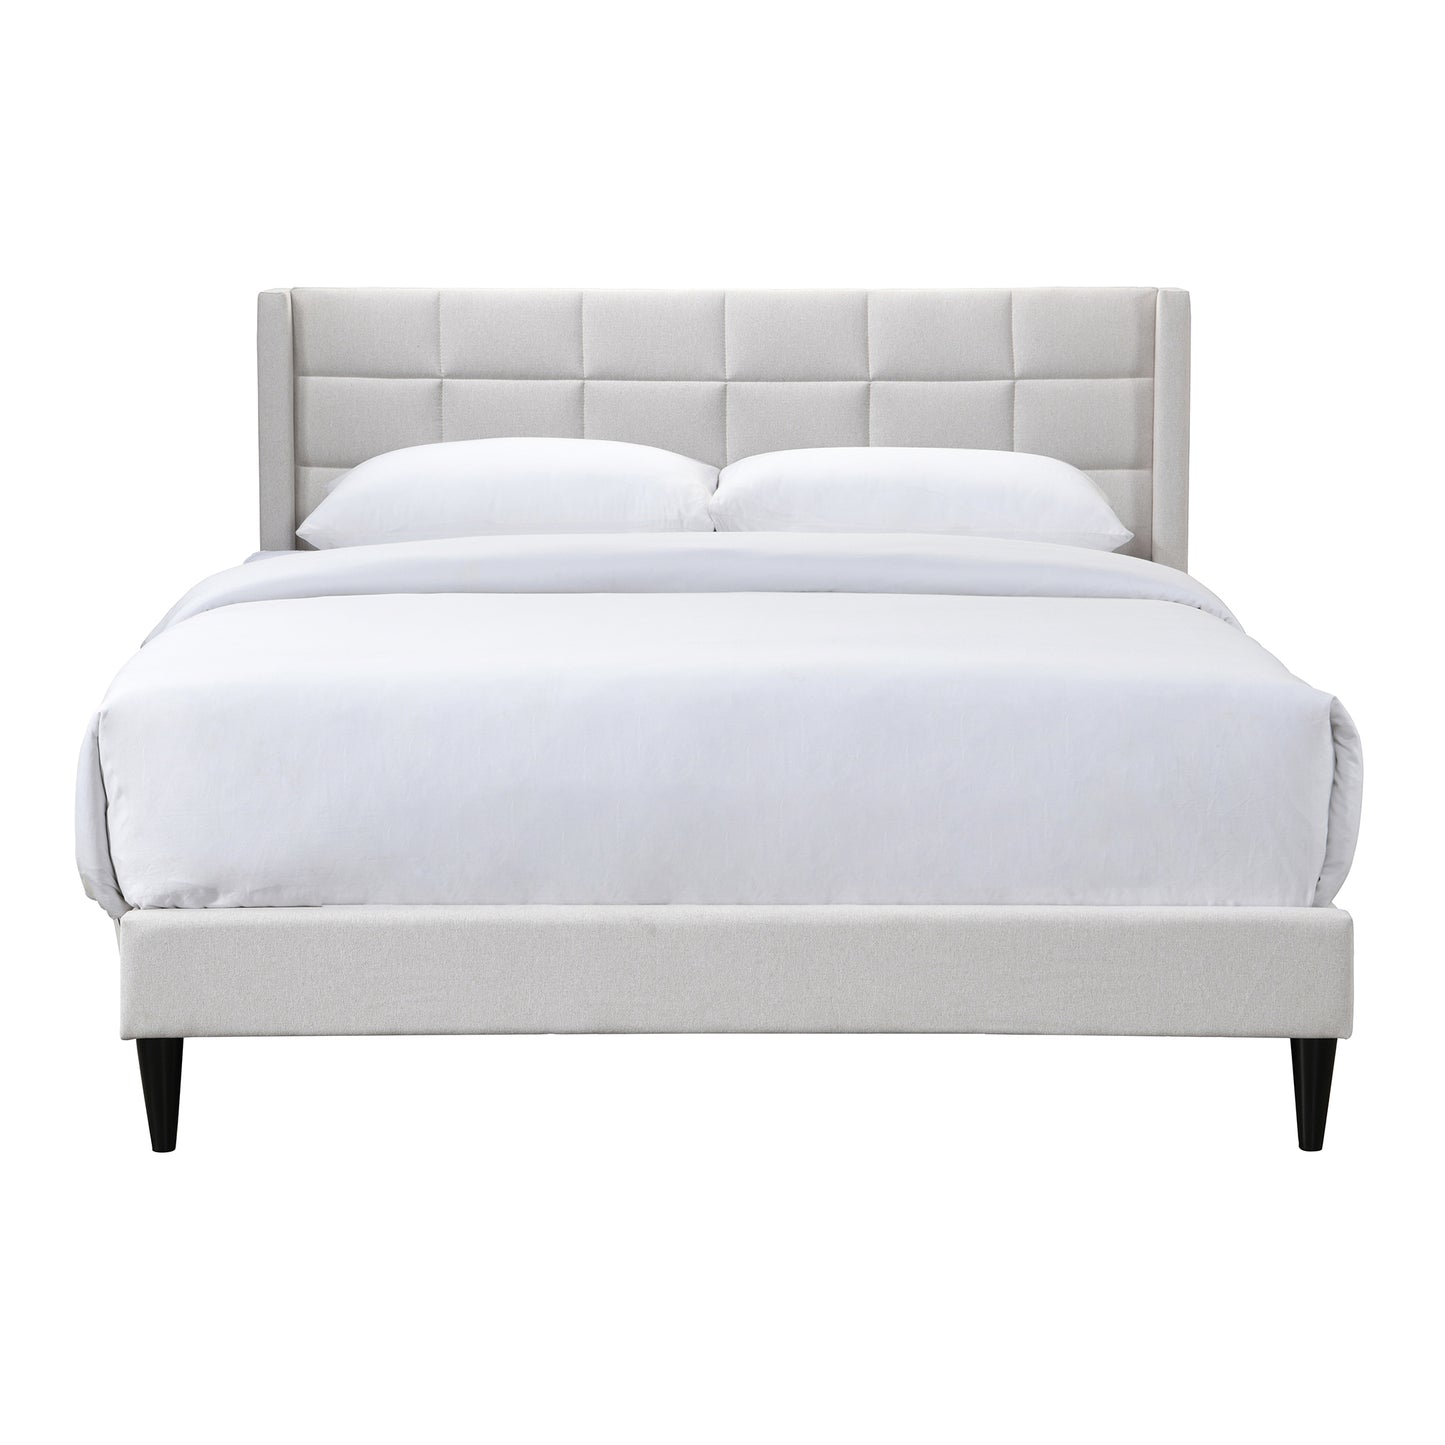 Sylvia Bed Frame - Double Size